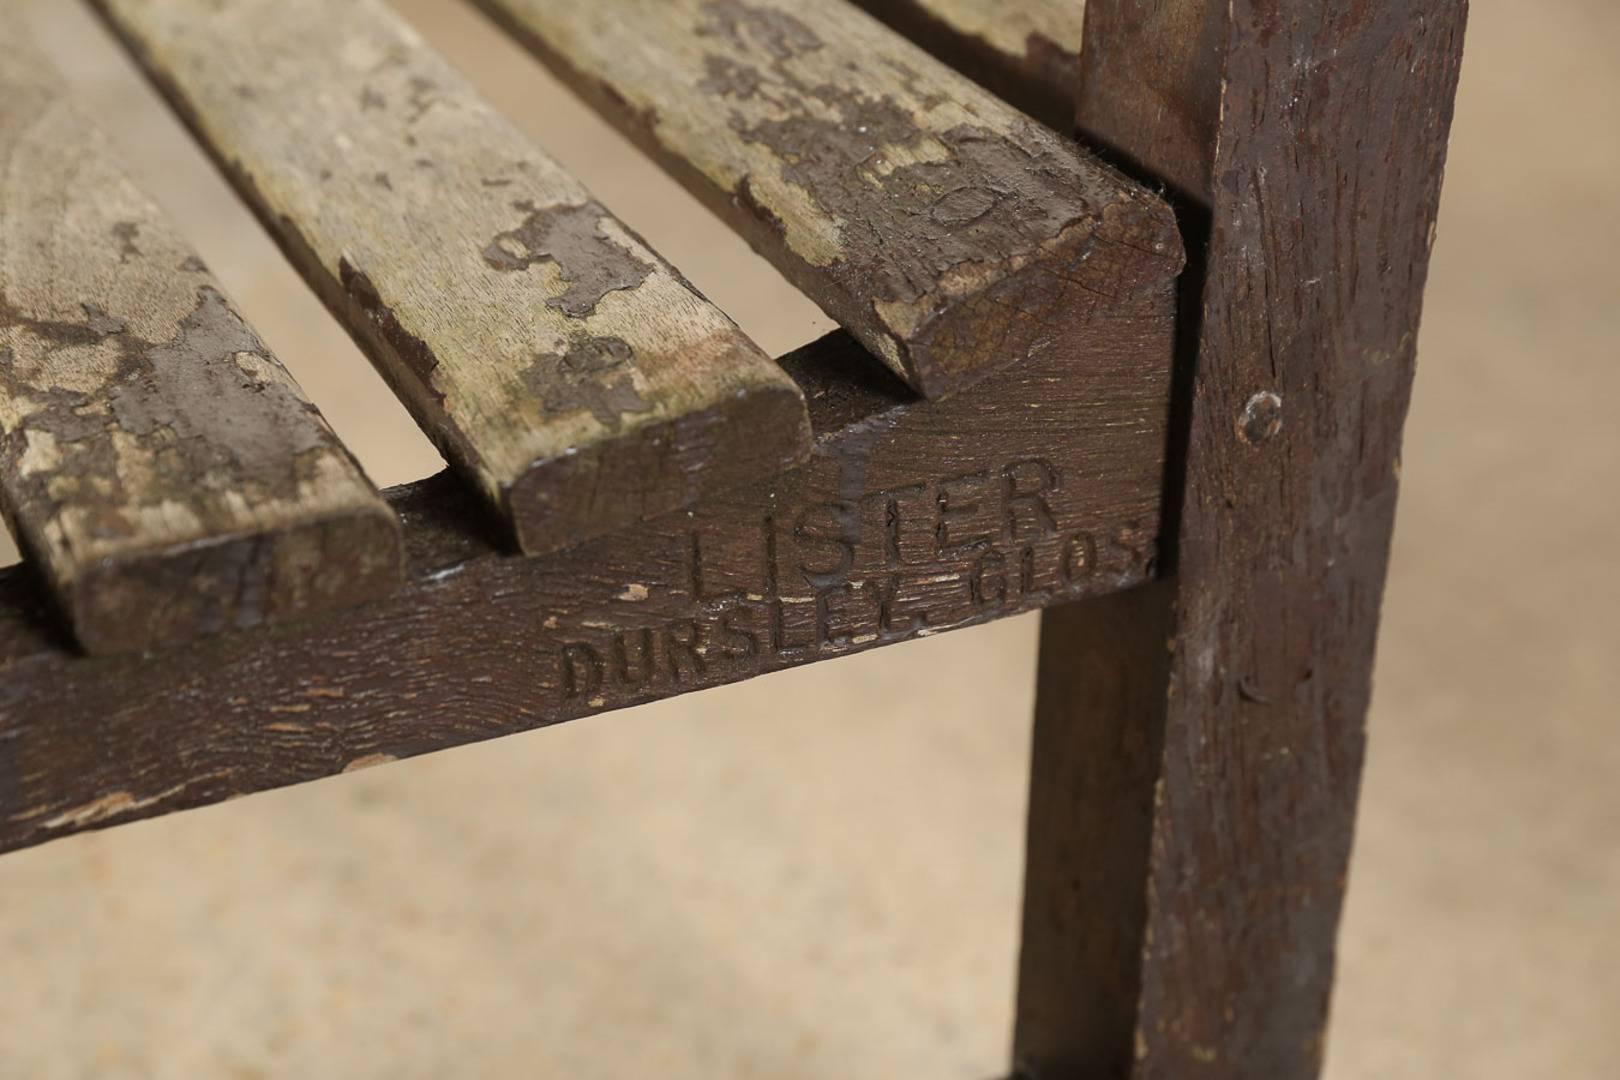 Great Britain (UK) Slatted Teak Bench from the London Zoo